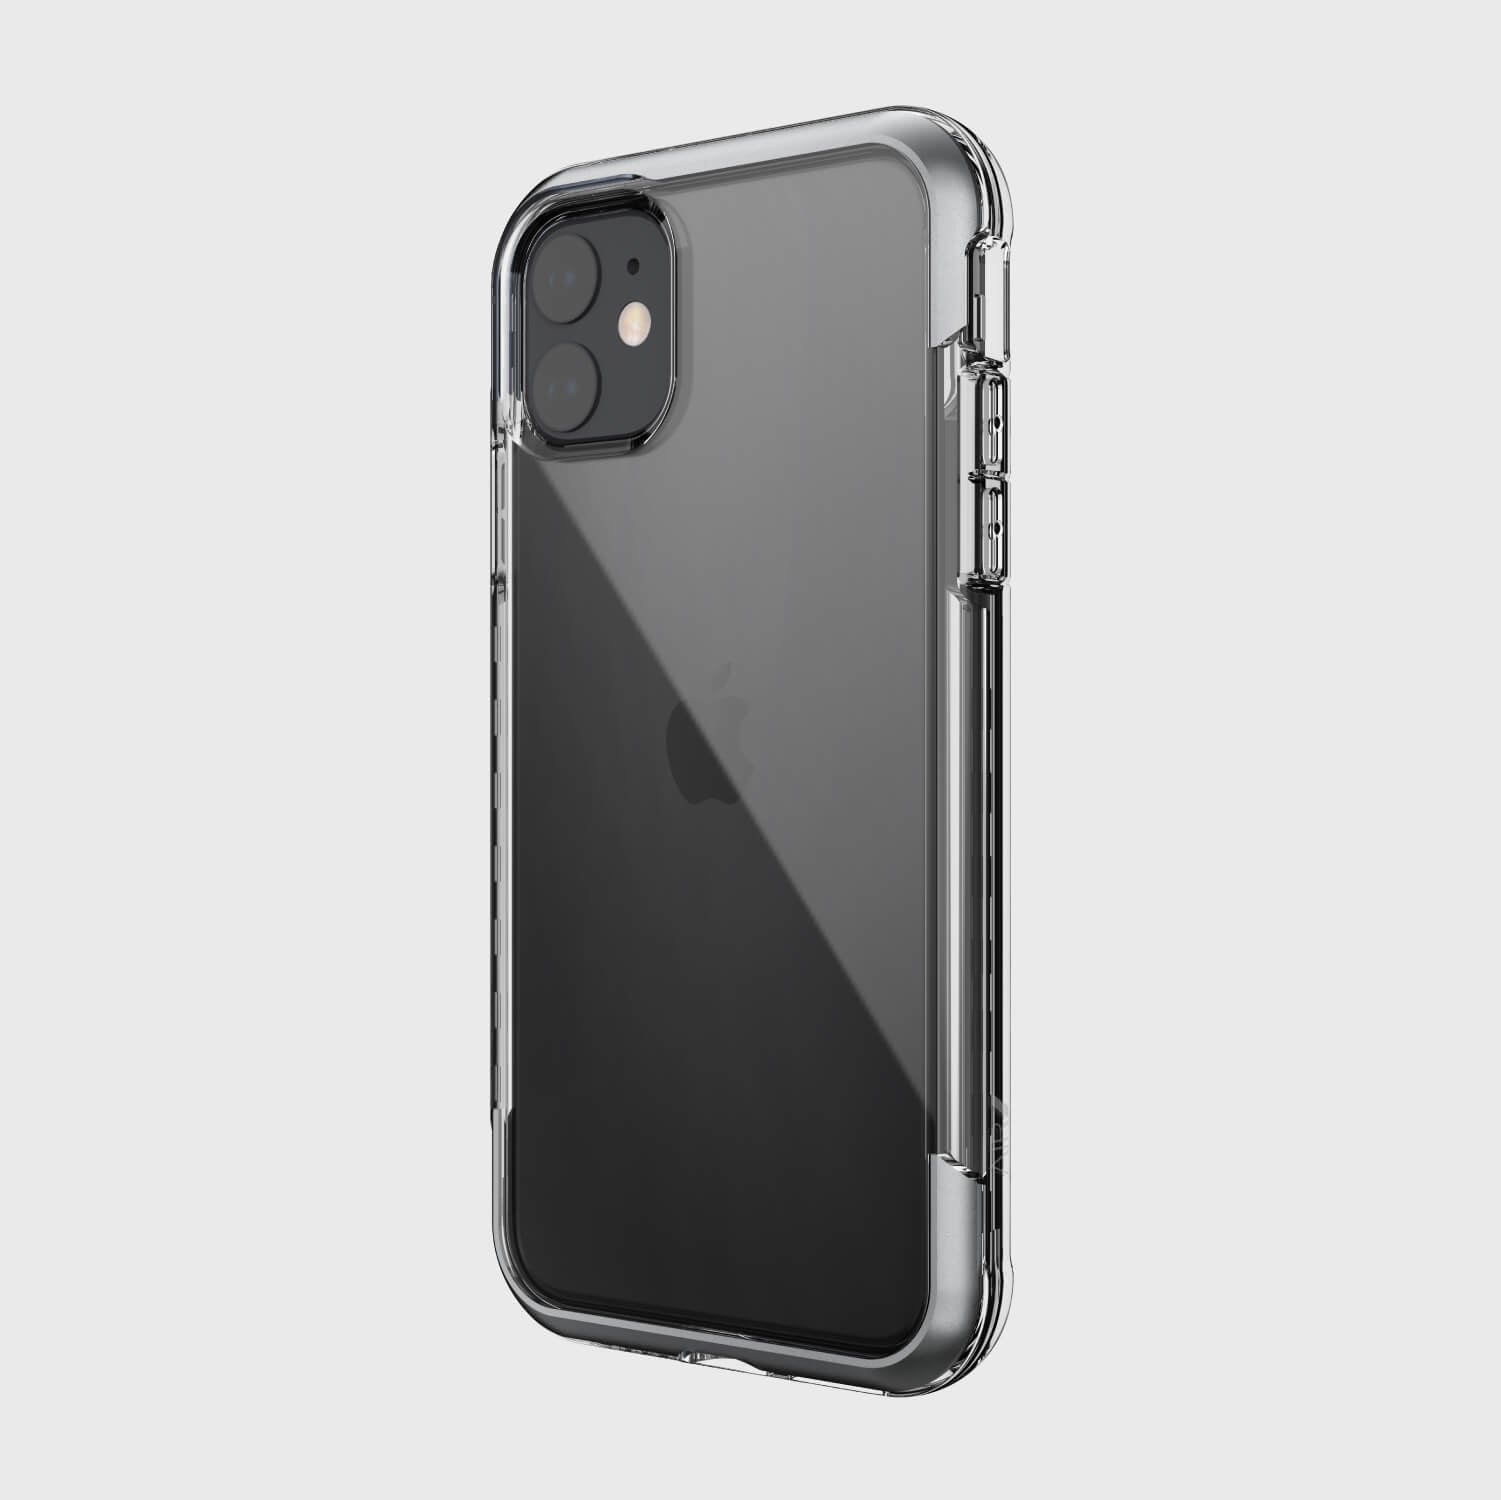 The back view of an iPhone 11 Pro Max case with Raptic AIR and 13 foot drop protection.